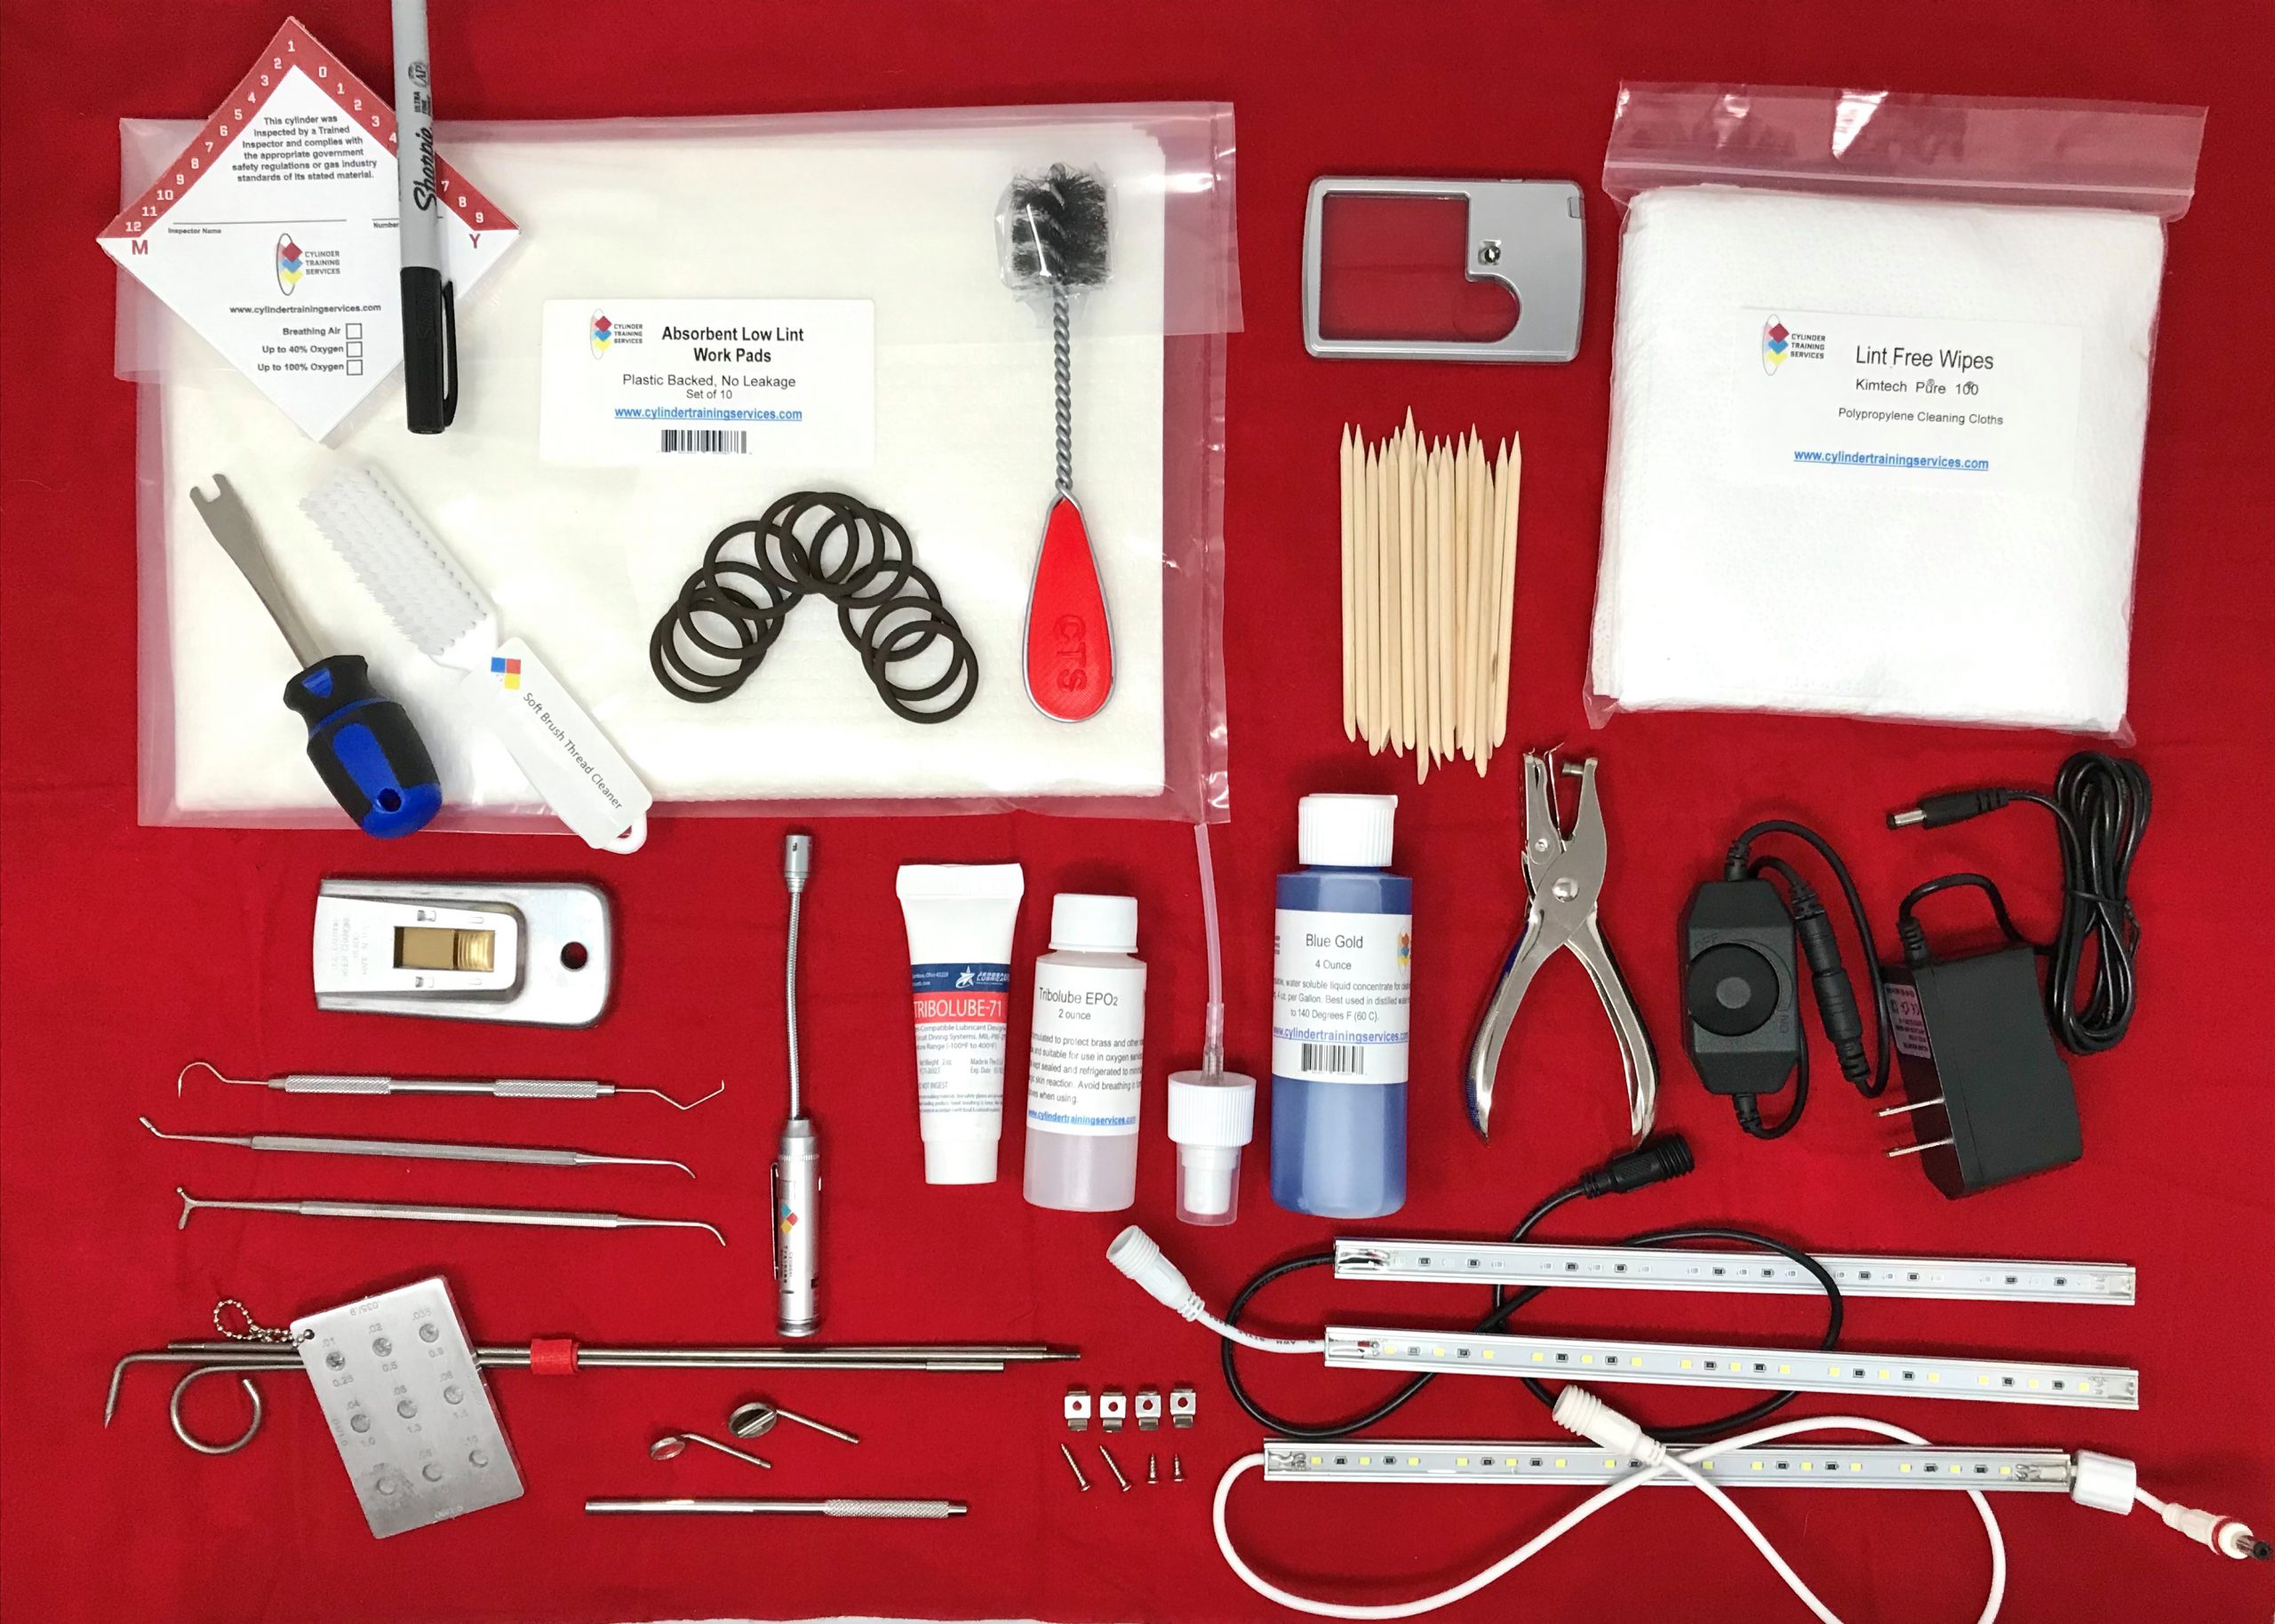 Cylinder Deluxe O2 Inspection Kit